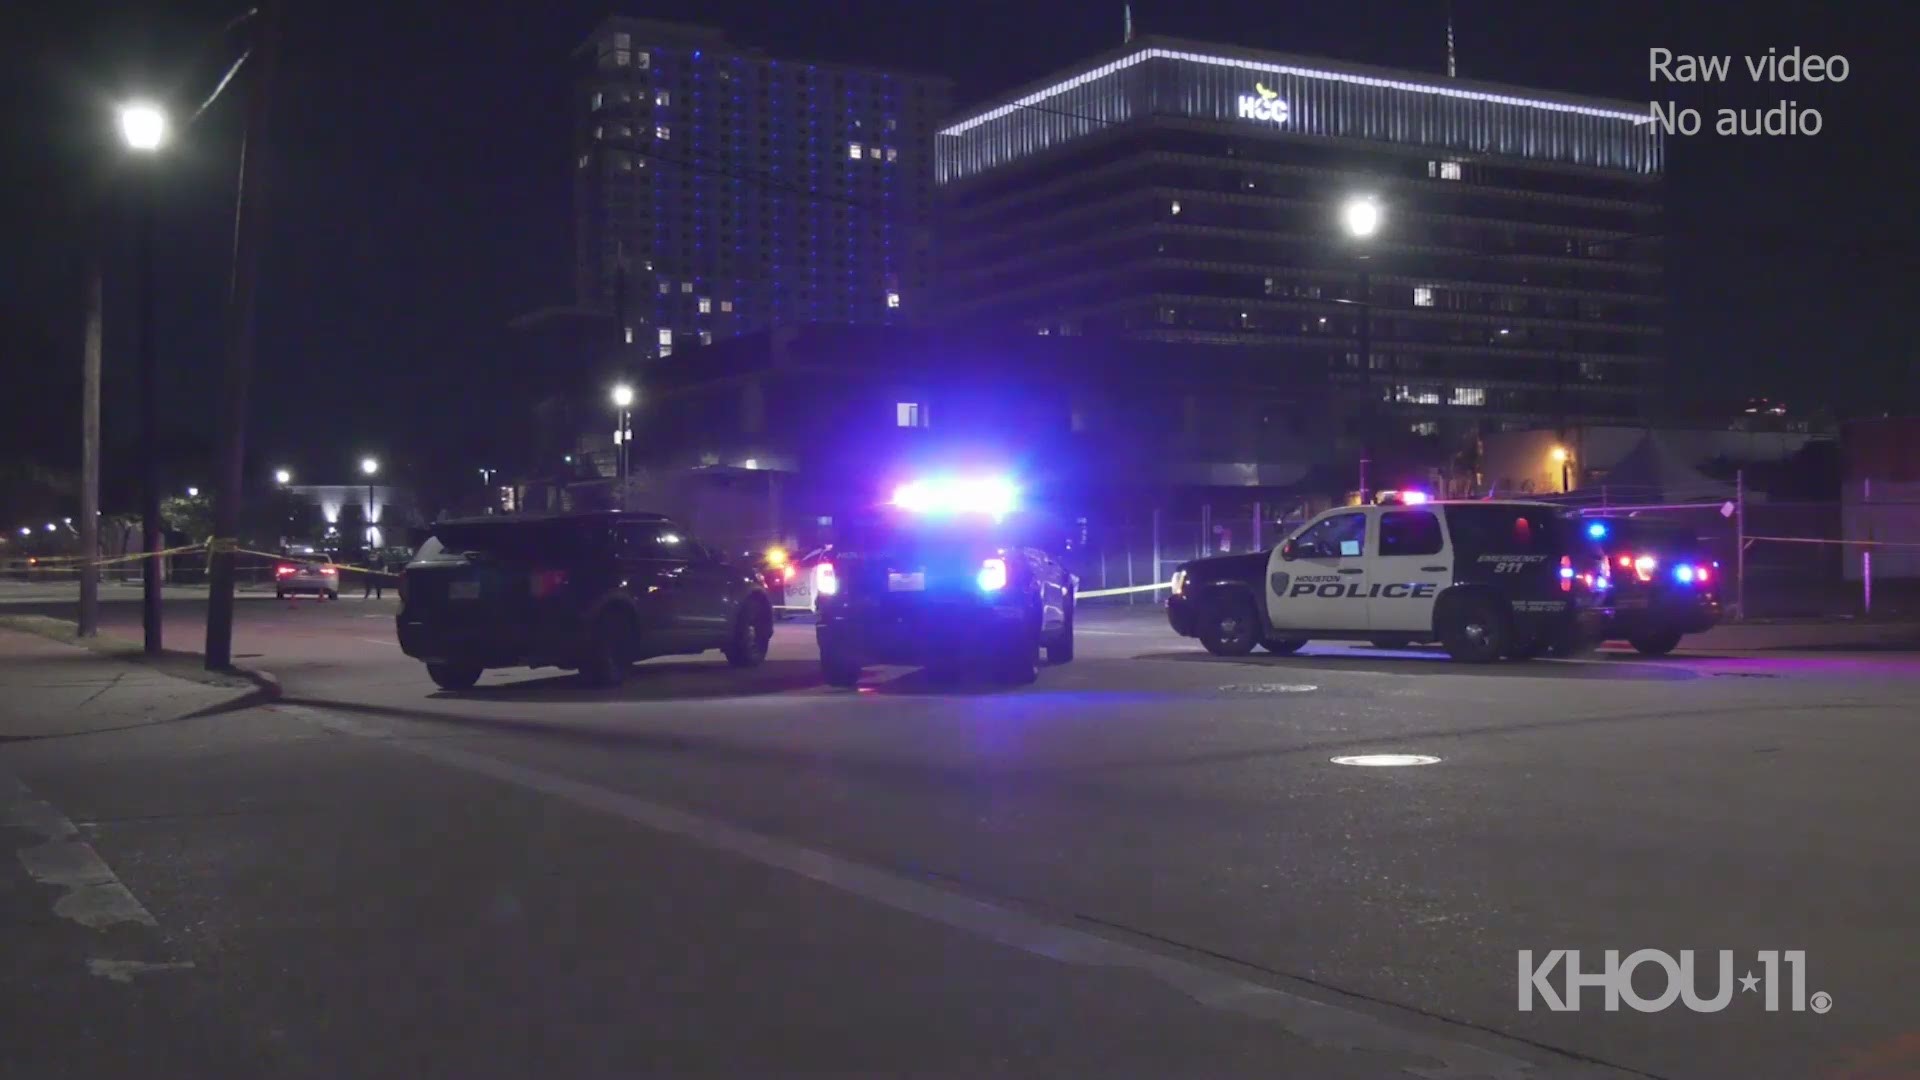 A man was chased down and fatally shot in Houston’s Midtown early Monday, police said.